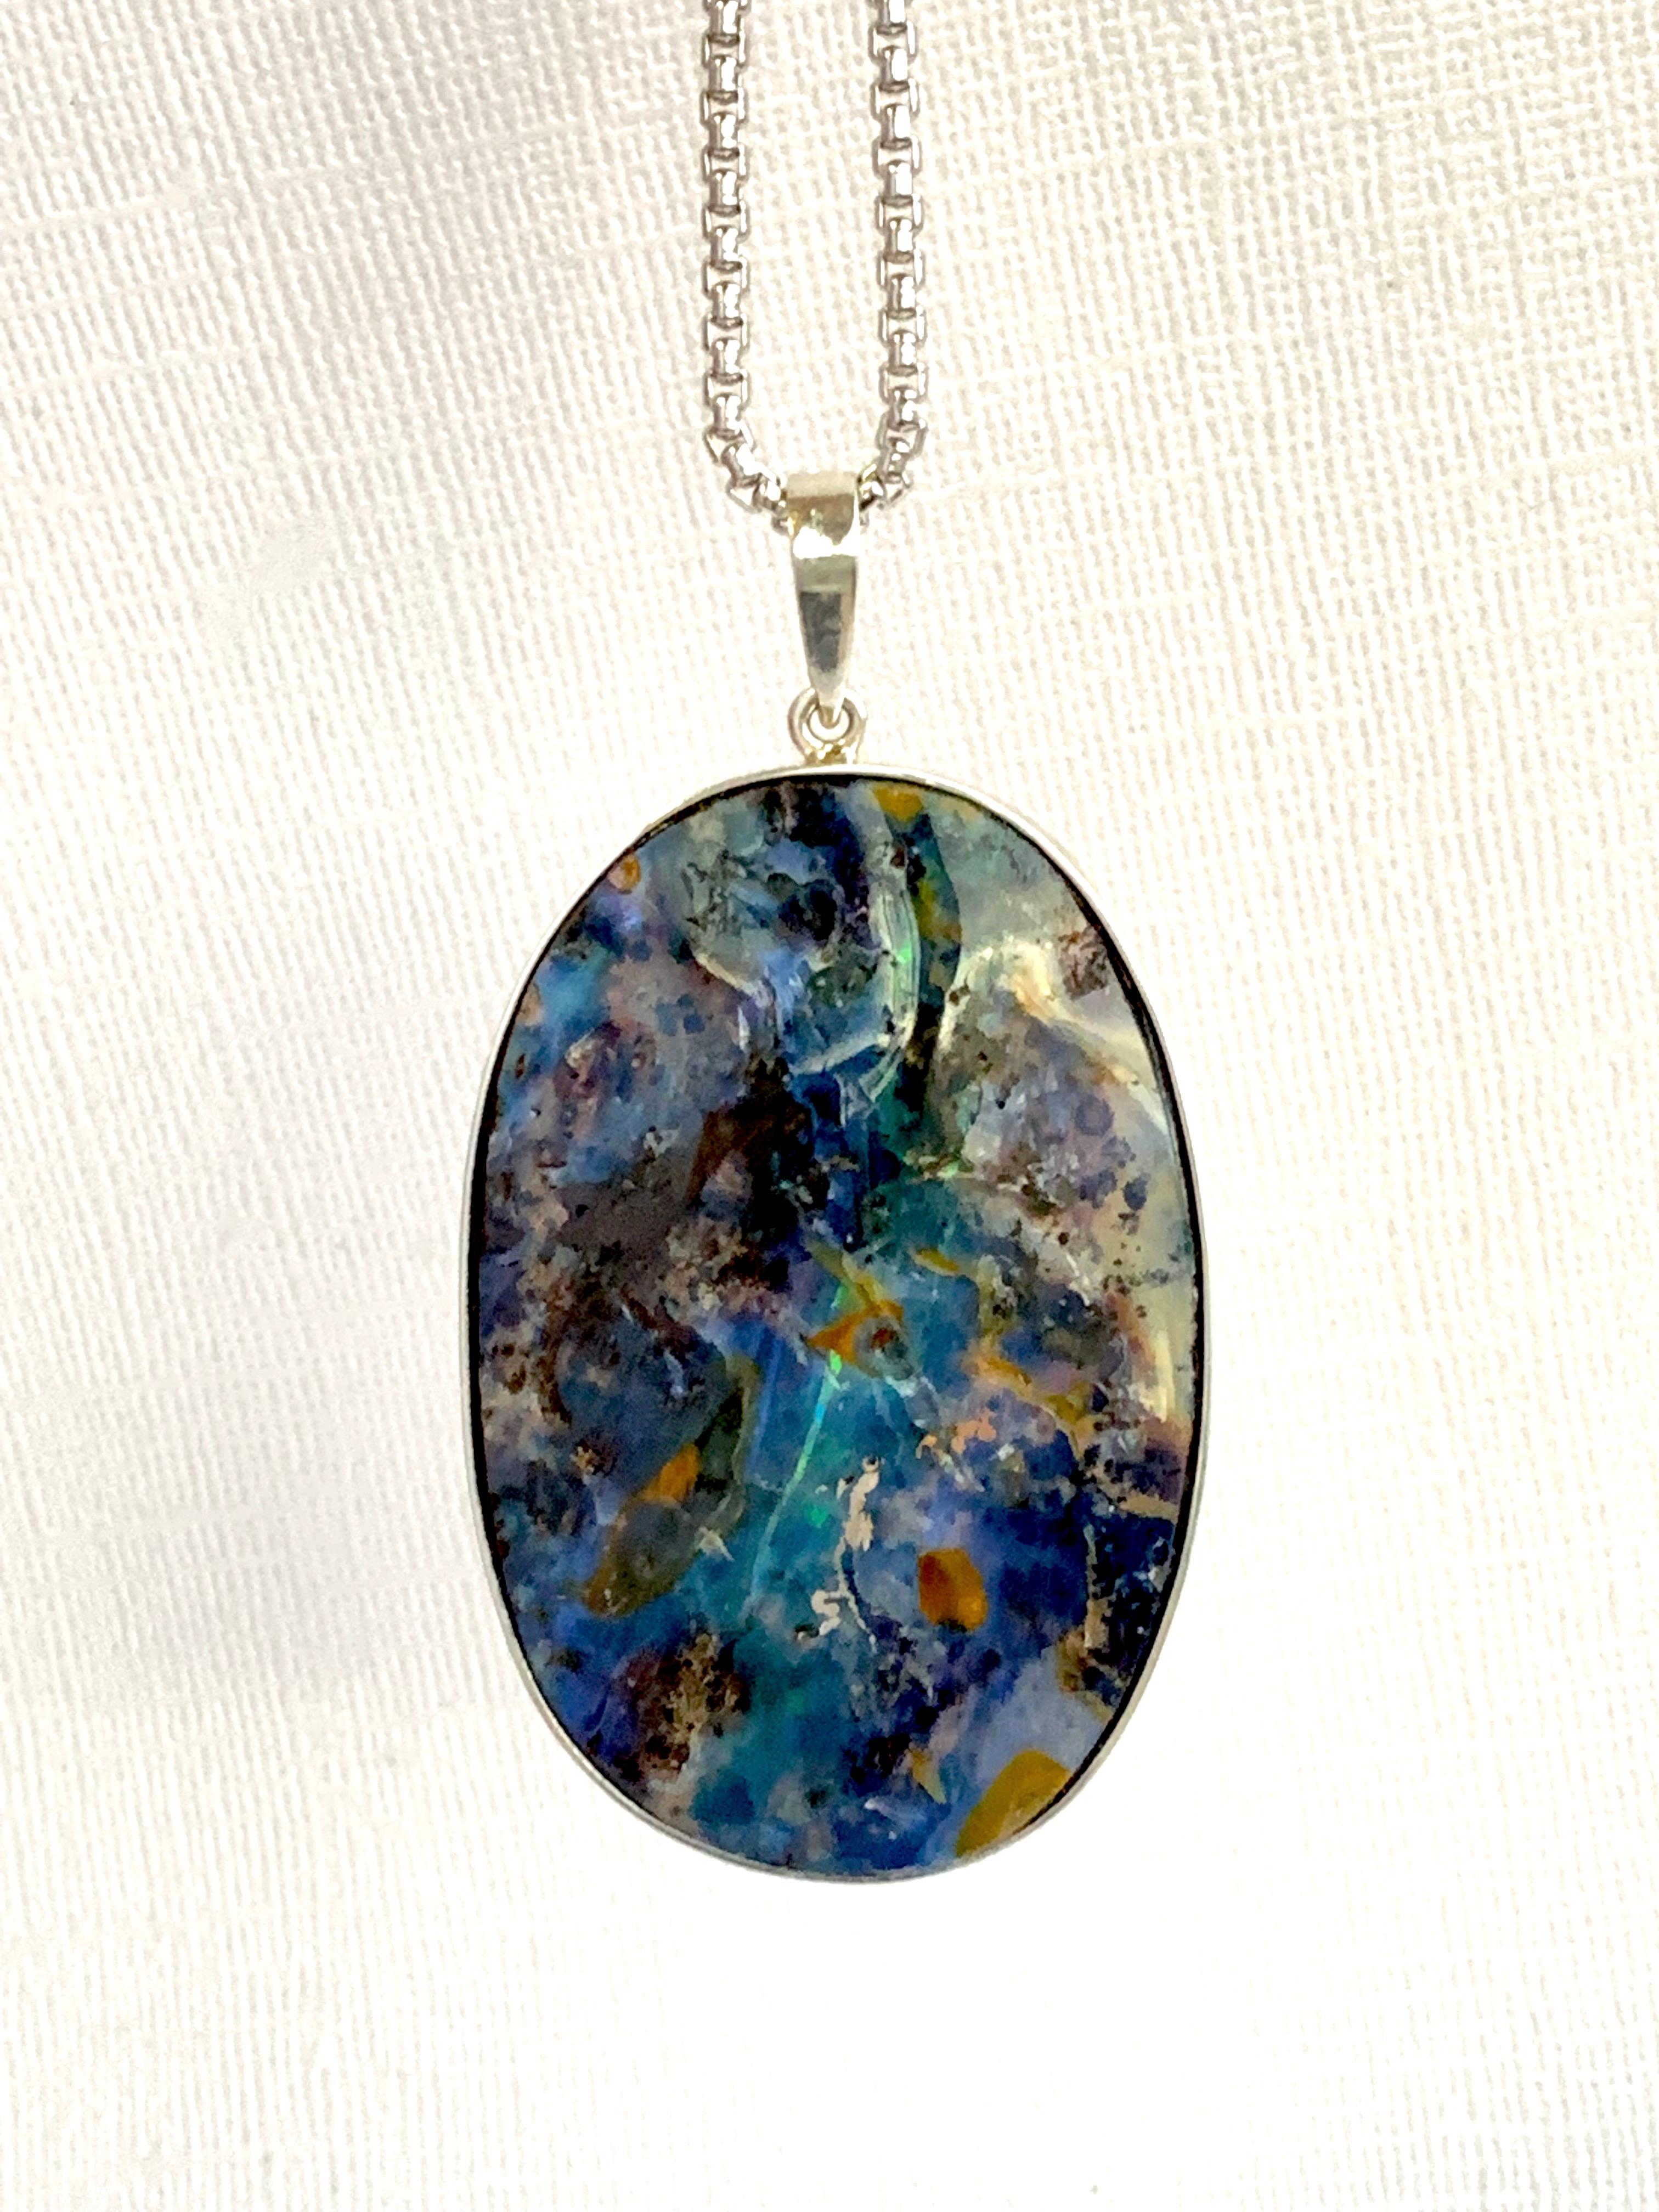 A unique piece, this Opal is a true showstopper! 

Material: Silver
Center Stone Details: 1 Opal at 165.41 Carats- Measuring 52 x 34 mm

Fine one-of-a-kind craftsmanship meets incredible quality in this breathtaking piece of jewelry.